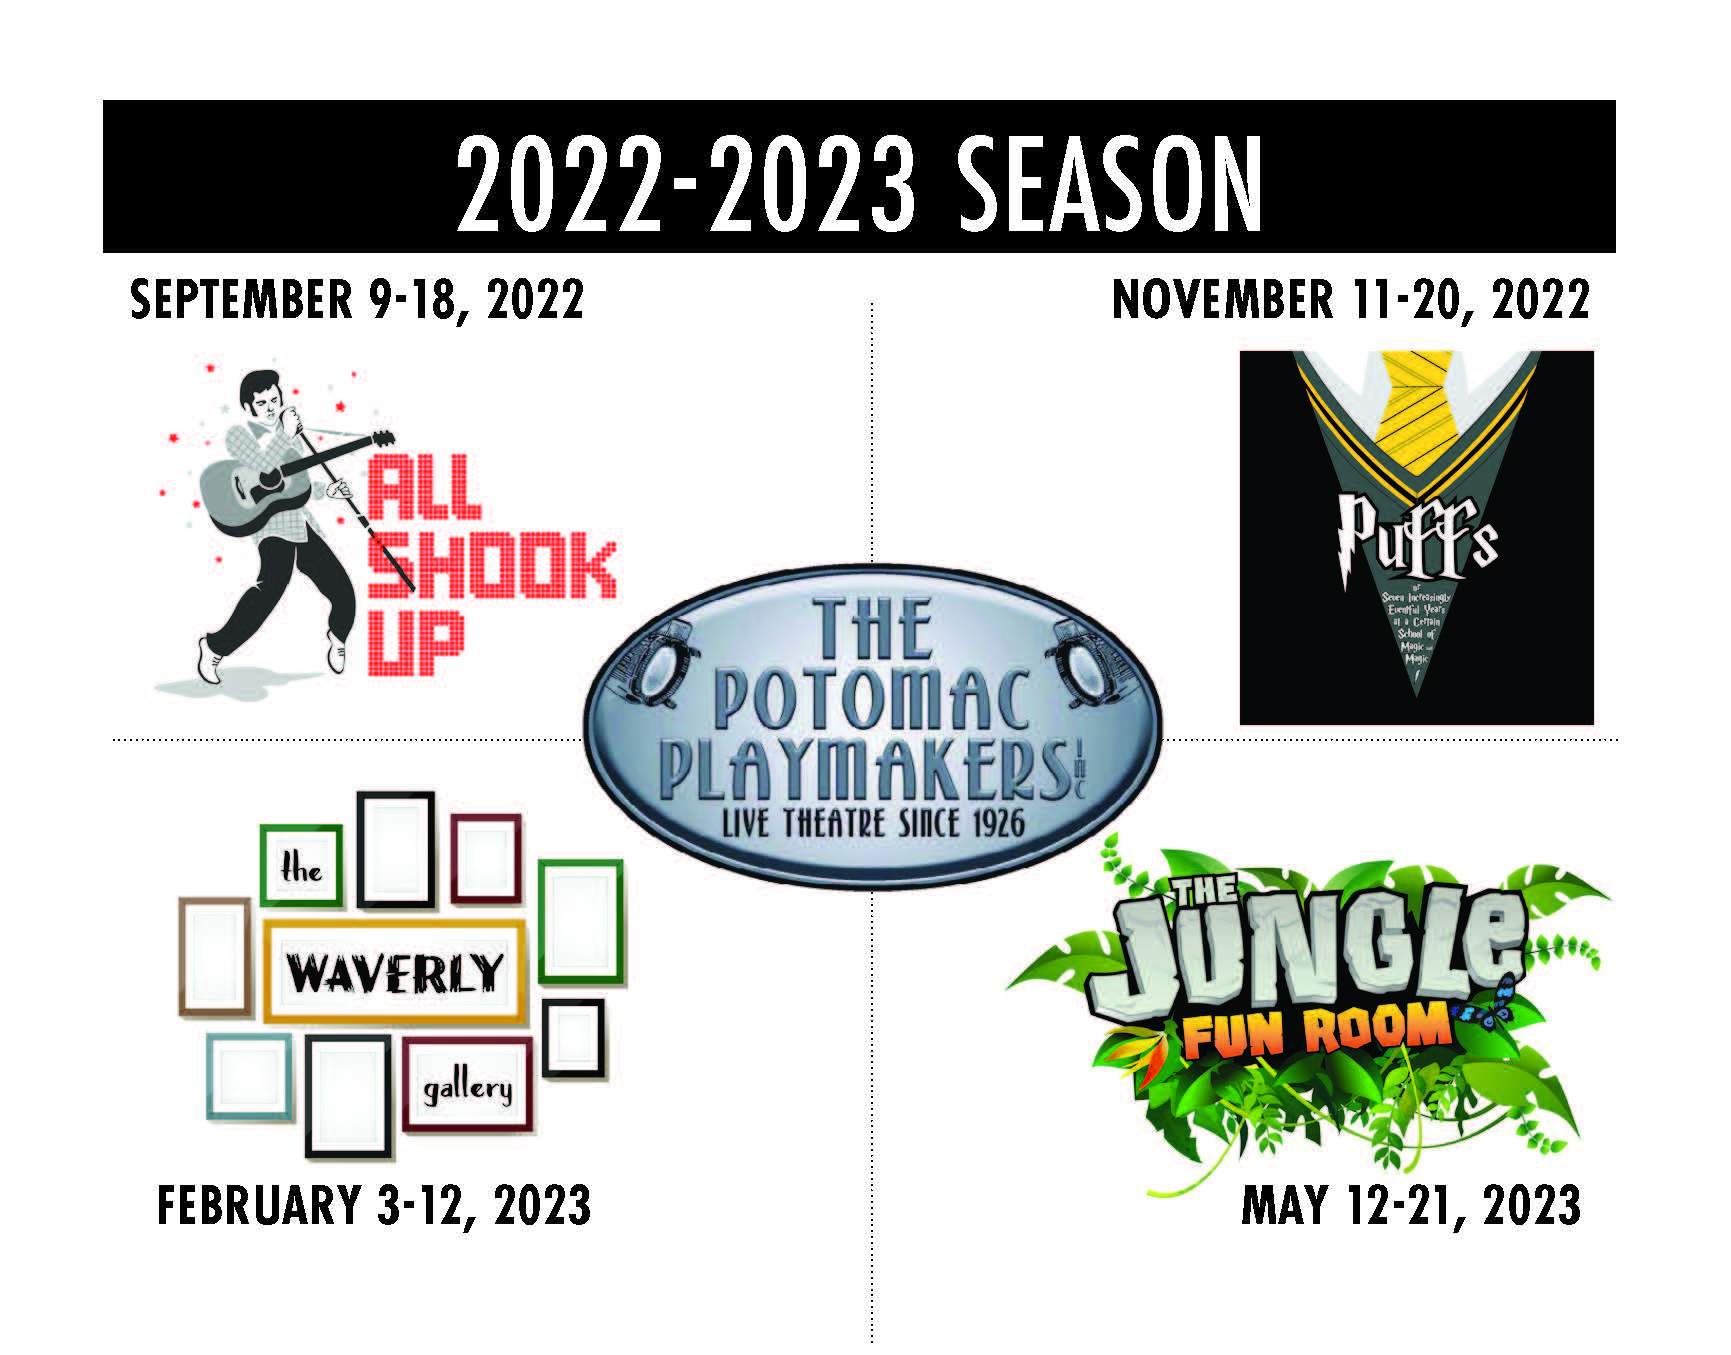 Announcing the New Season for 2022-2023